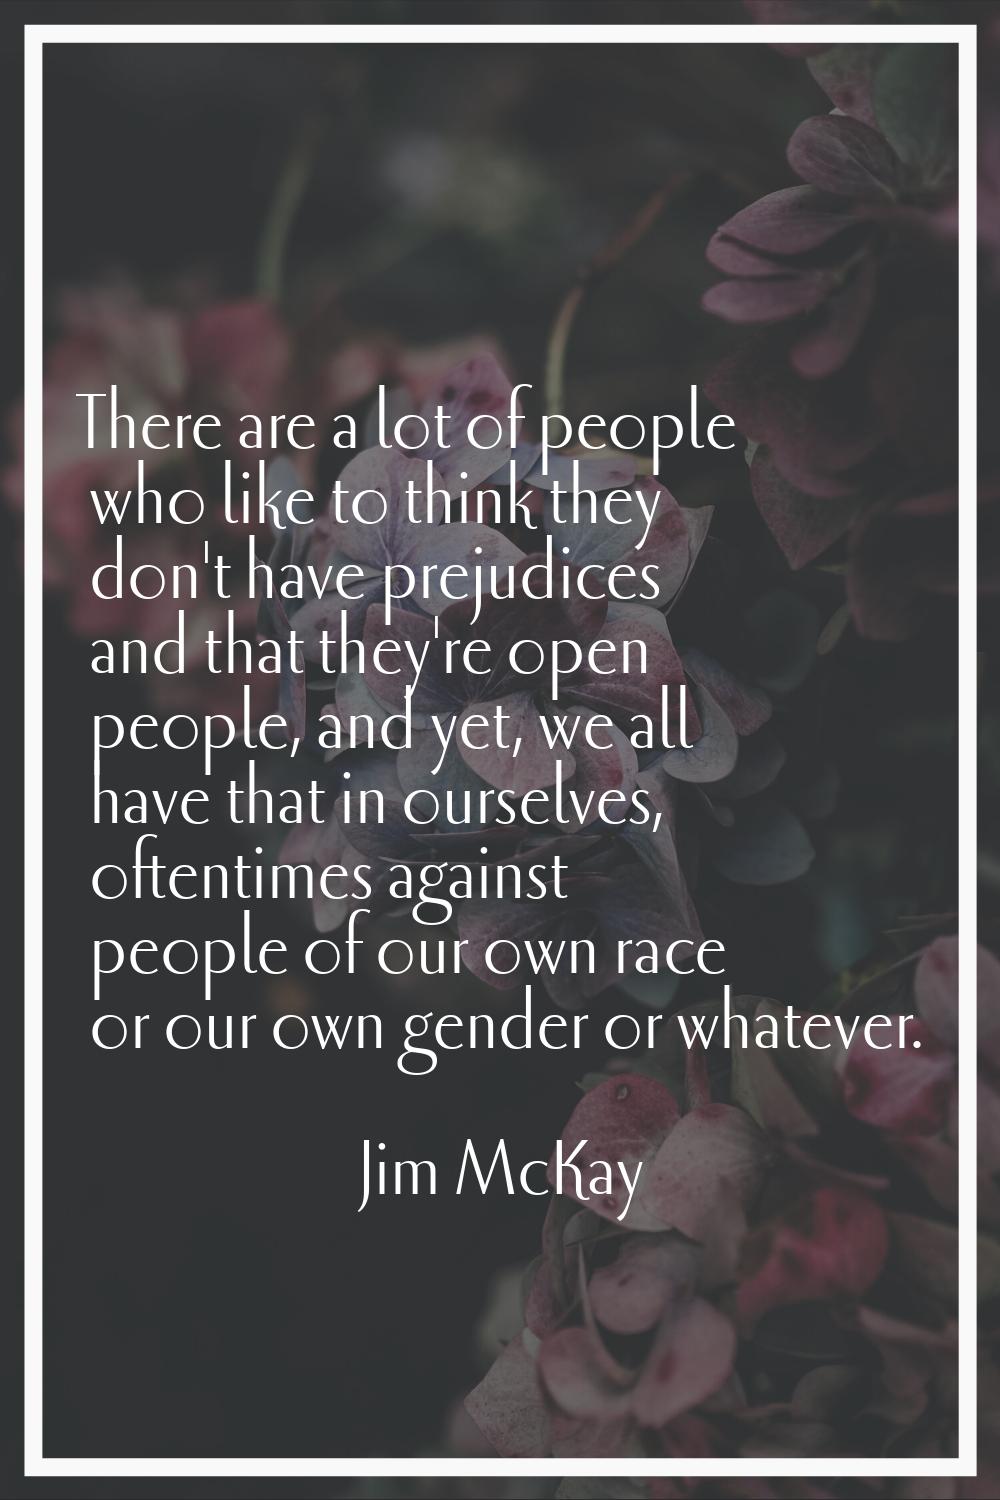 There are a lot of people who like to think they don't have prejudices and that they're open people